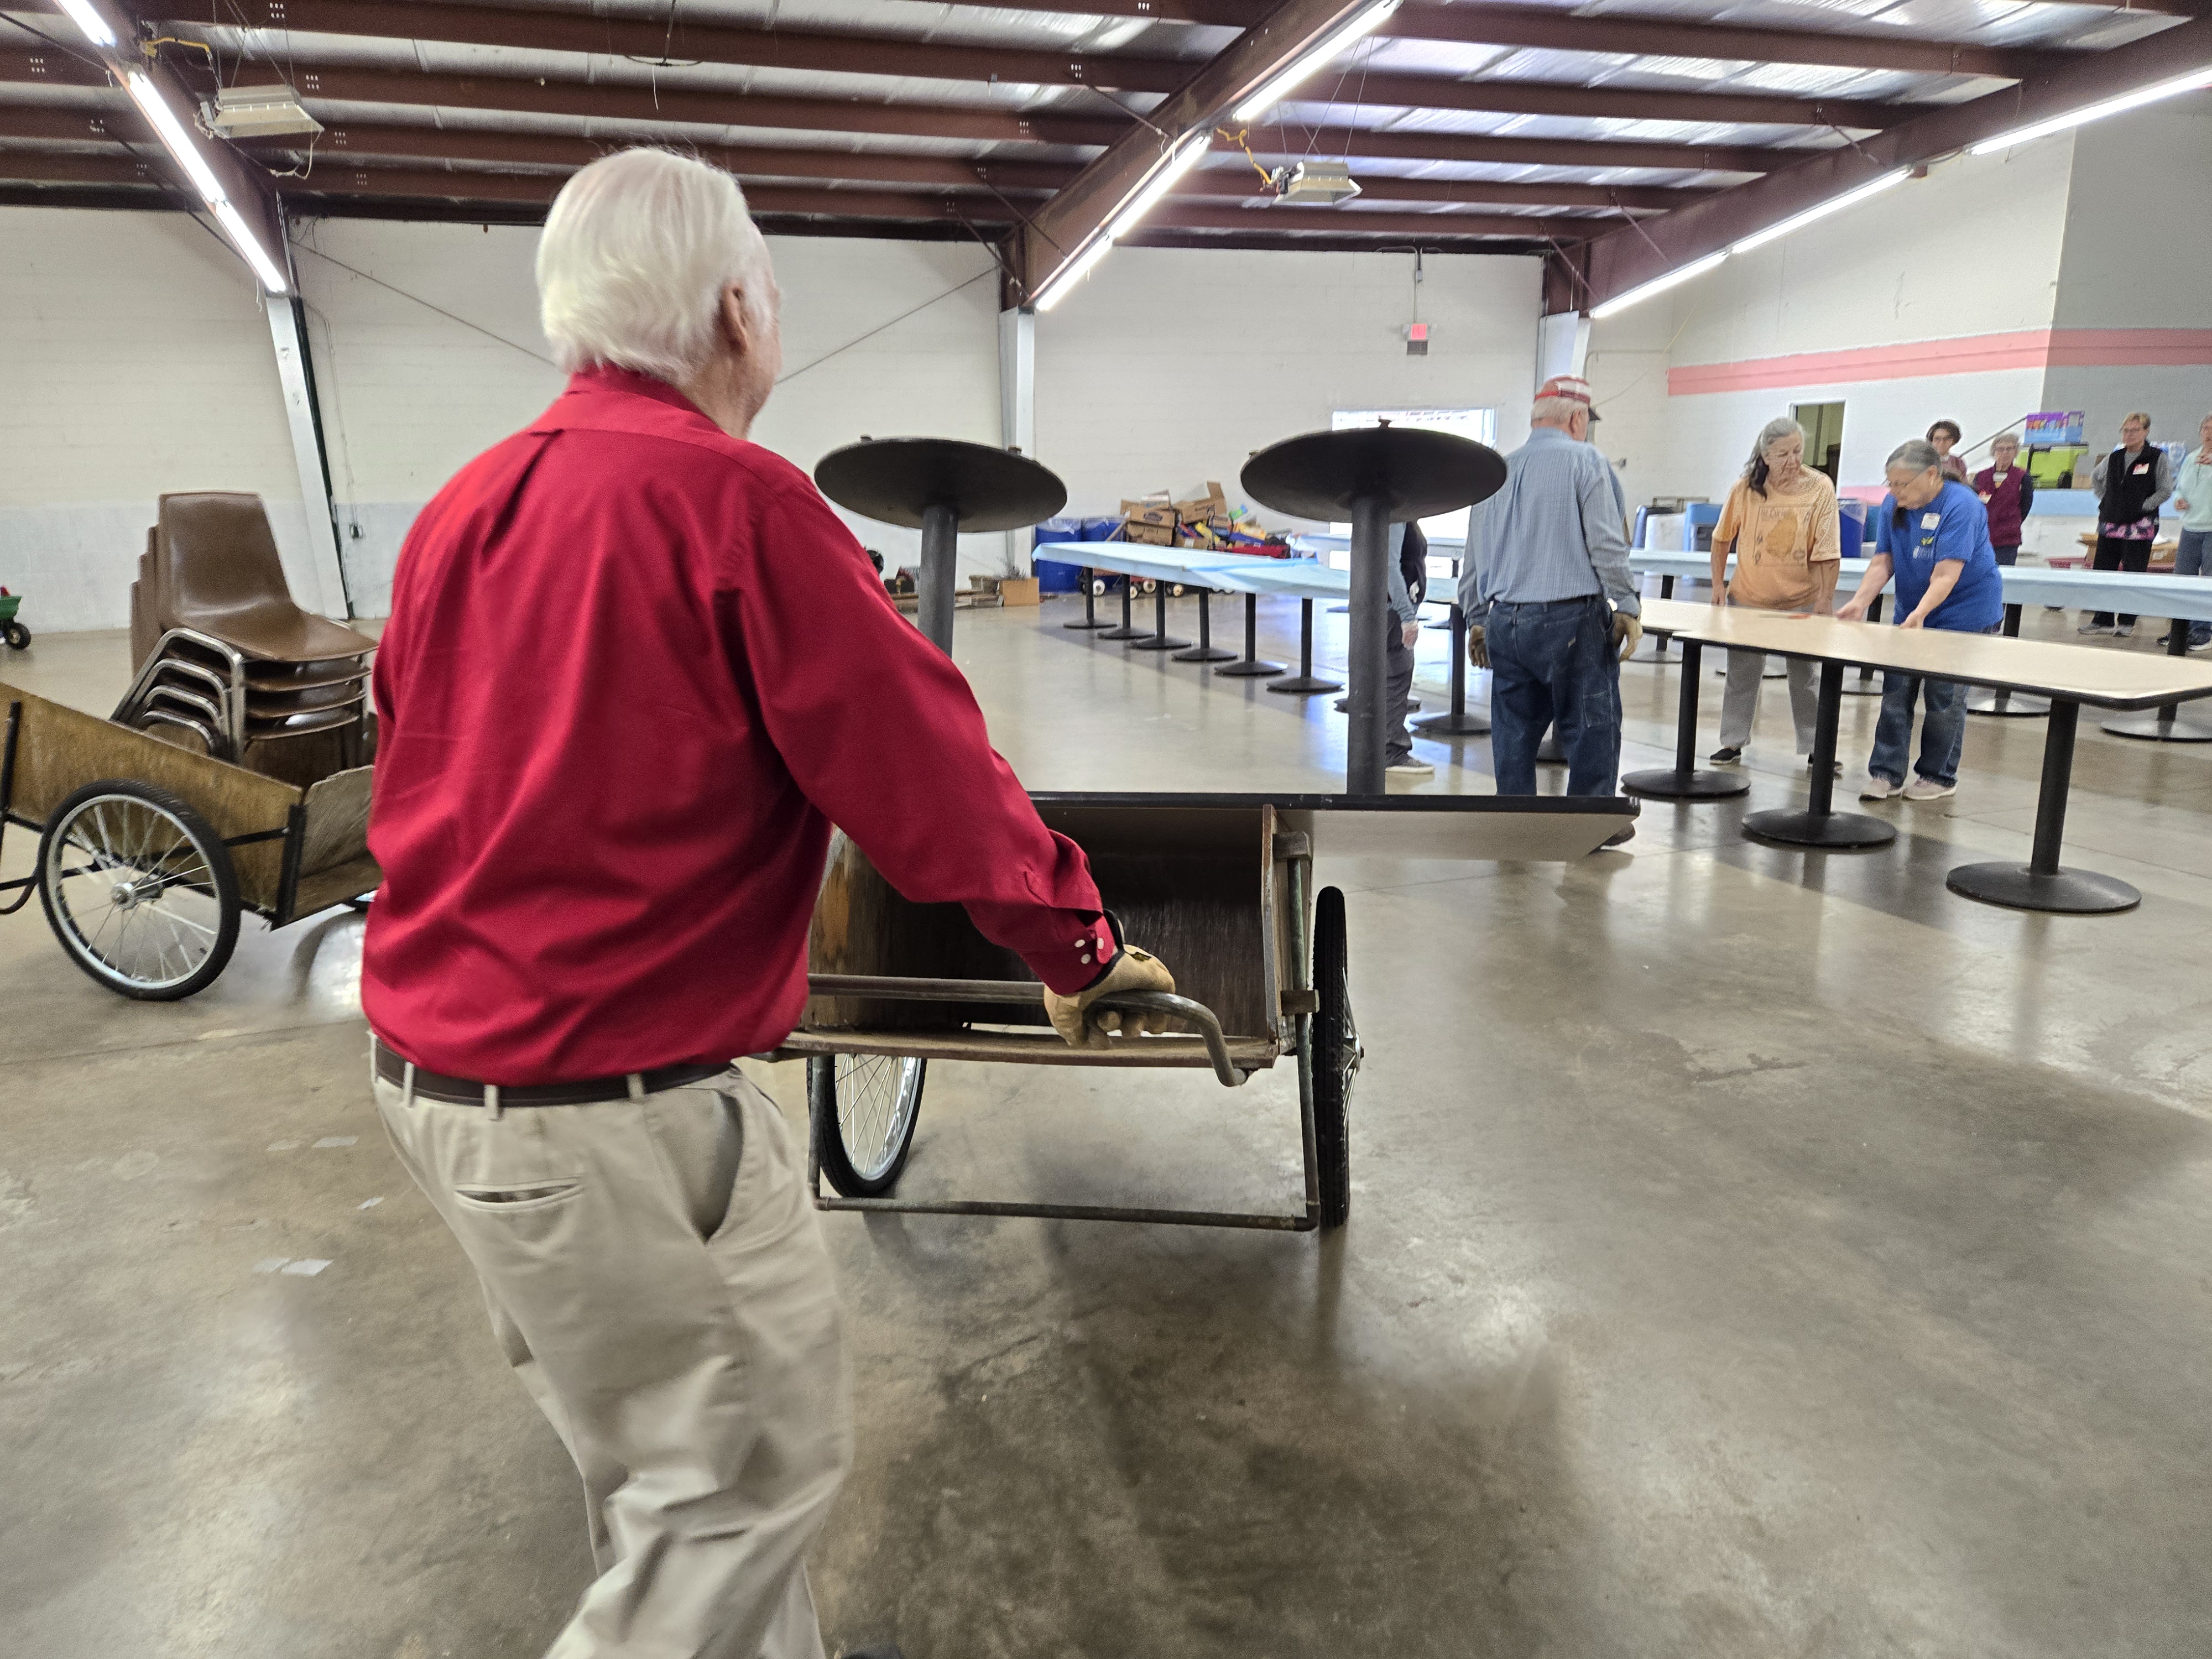 Using Carts to carry heavy Tables